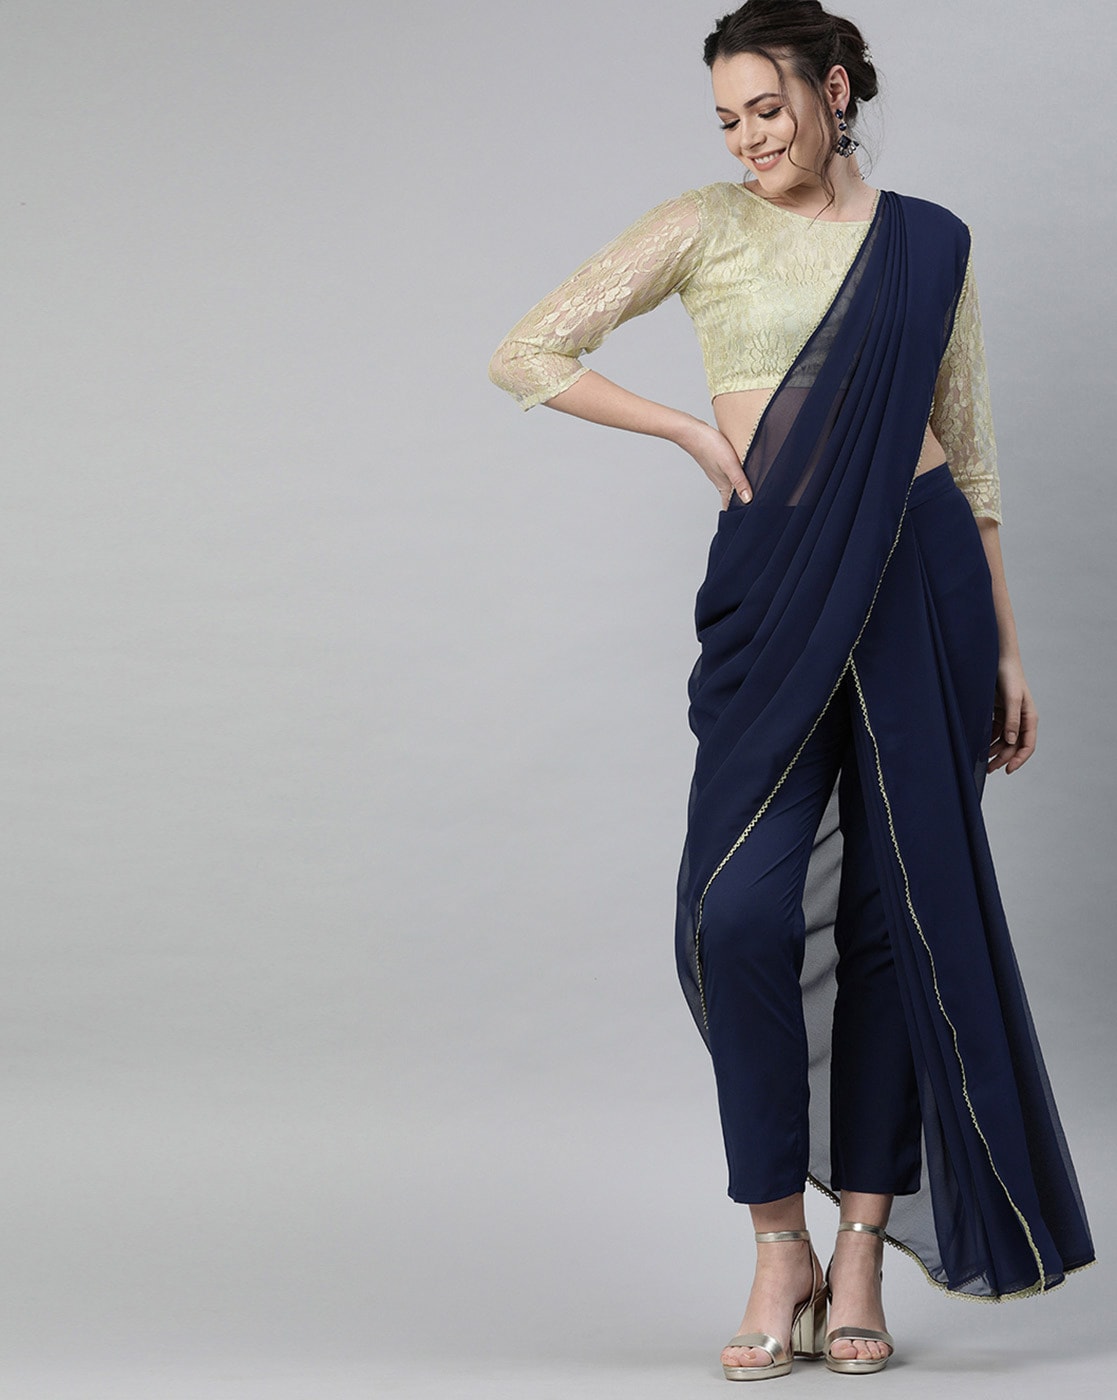 Pant style saree!!! Style with pant, trouser, legging, jeans. | Fashion  pants, Saree, Different styles